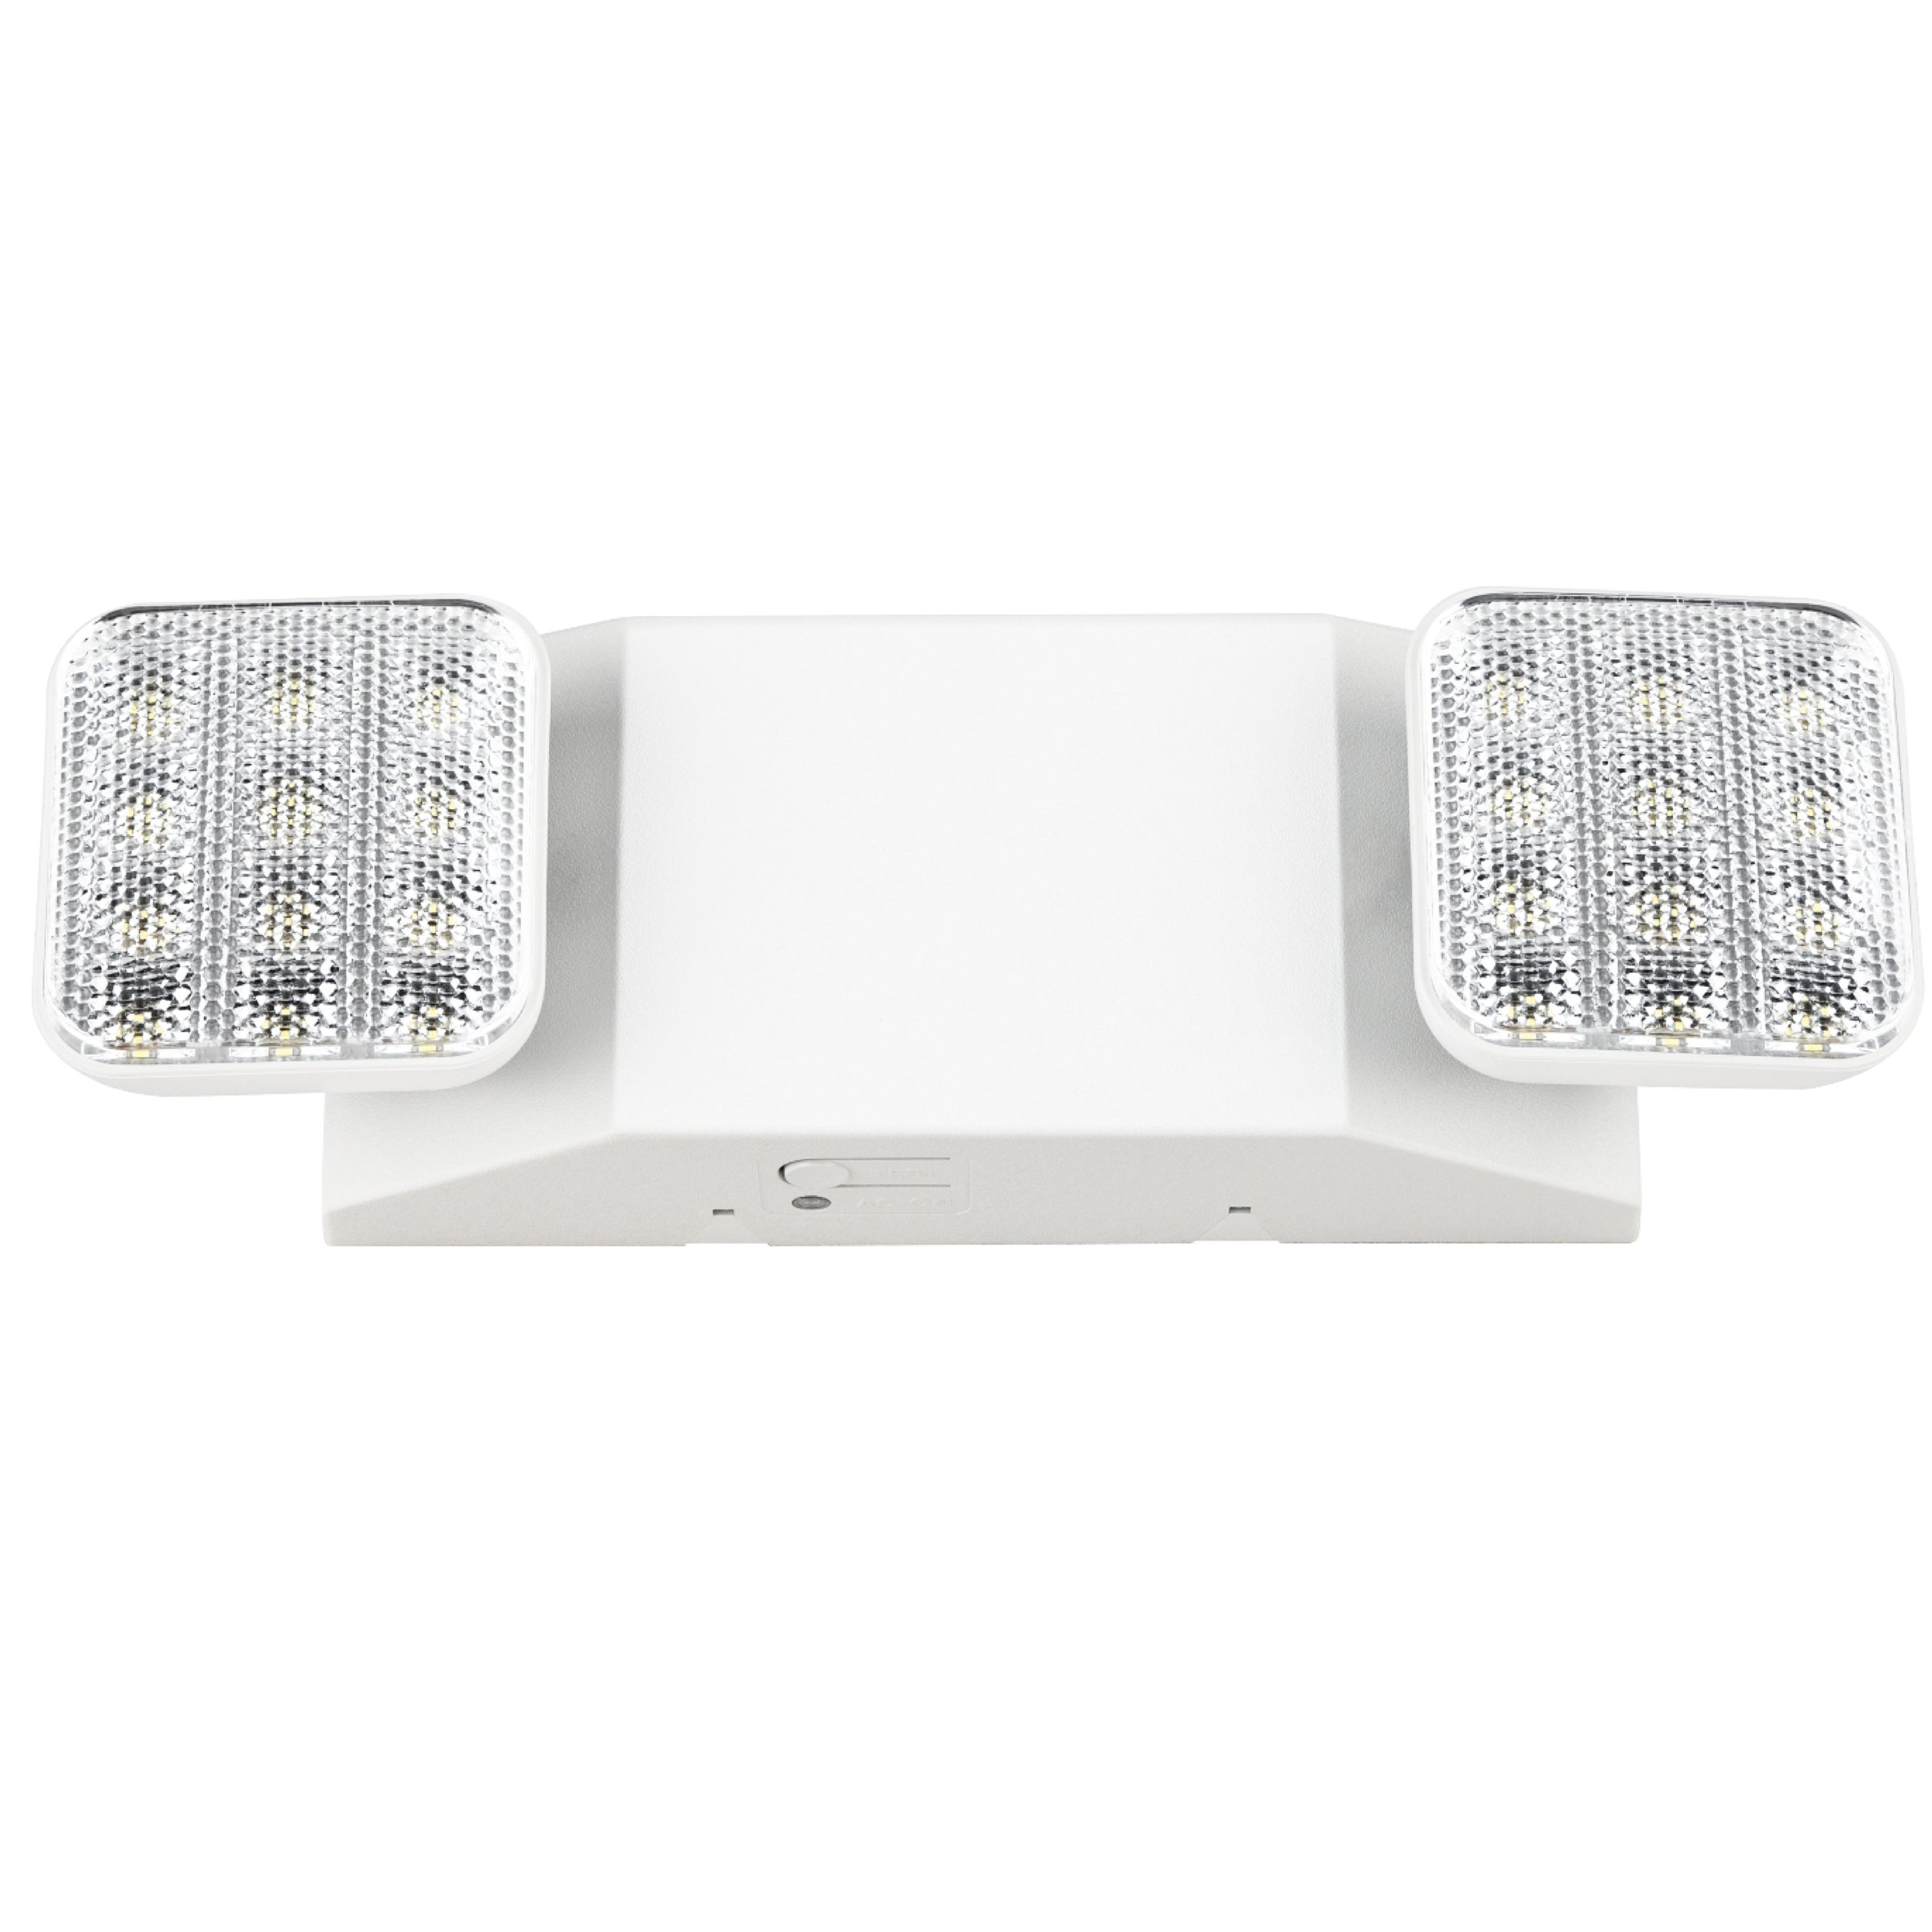 This LED Emergency Light from Sunco Lighting features 2 adjustable LED flood lights that swivel and rotate to light up the path to safety. With a 50,000hour lifespan and integrated LED heads your maintenance will be low with this product. It includes a 180-minute backup battery to turn on during a power outage or emergency situation with a power loss. Can be wall mounted for light in stairwells, interior rooms without windows, and janitorial spaces or access hallways to provide emergency light.